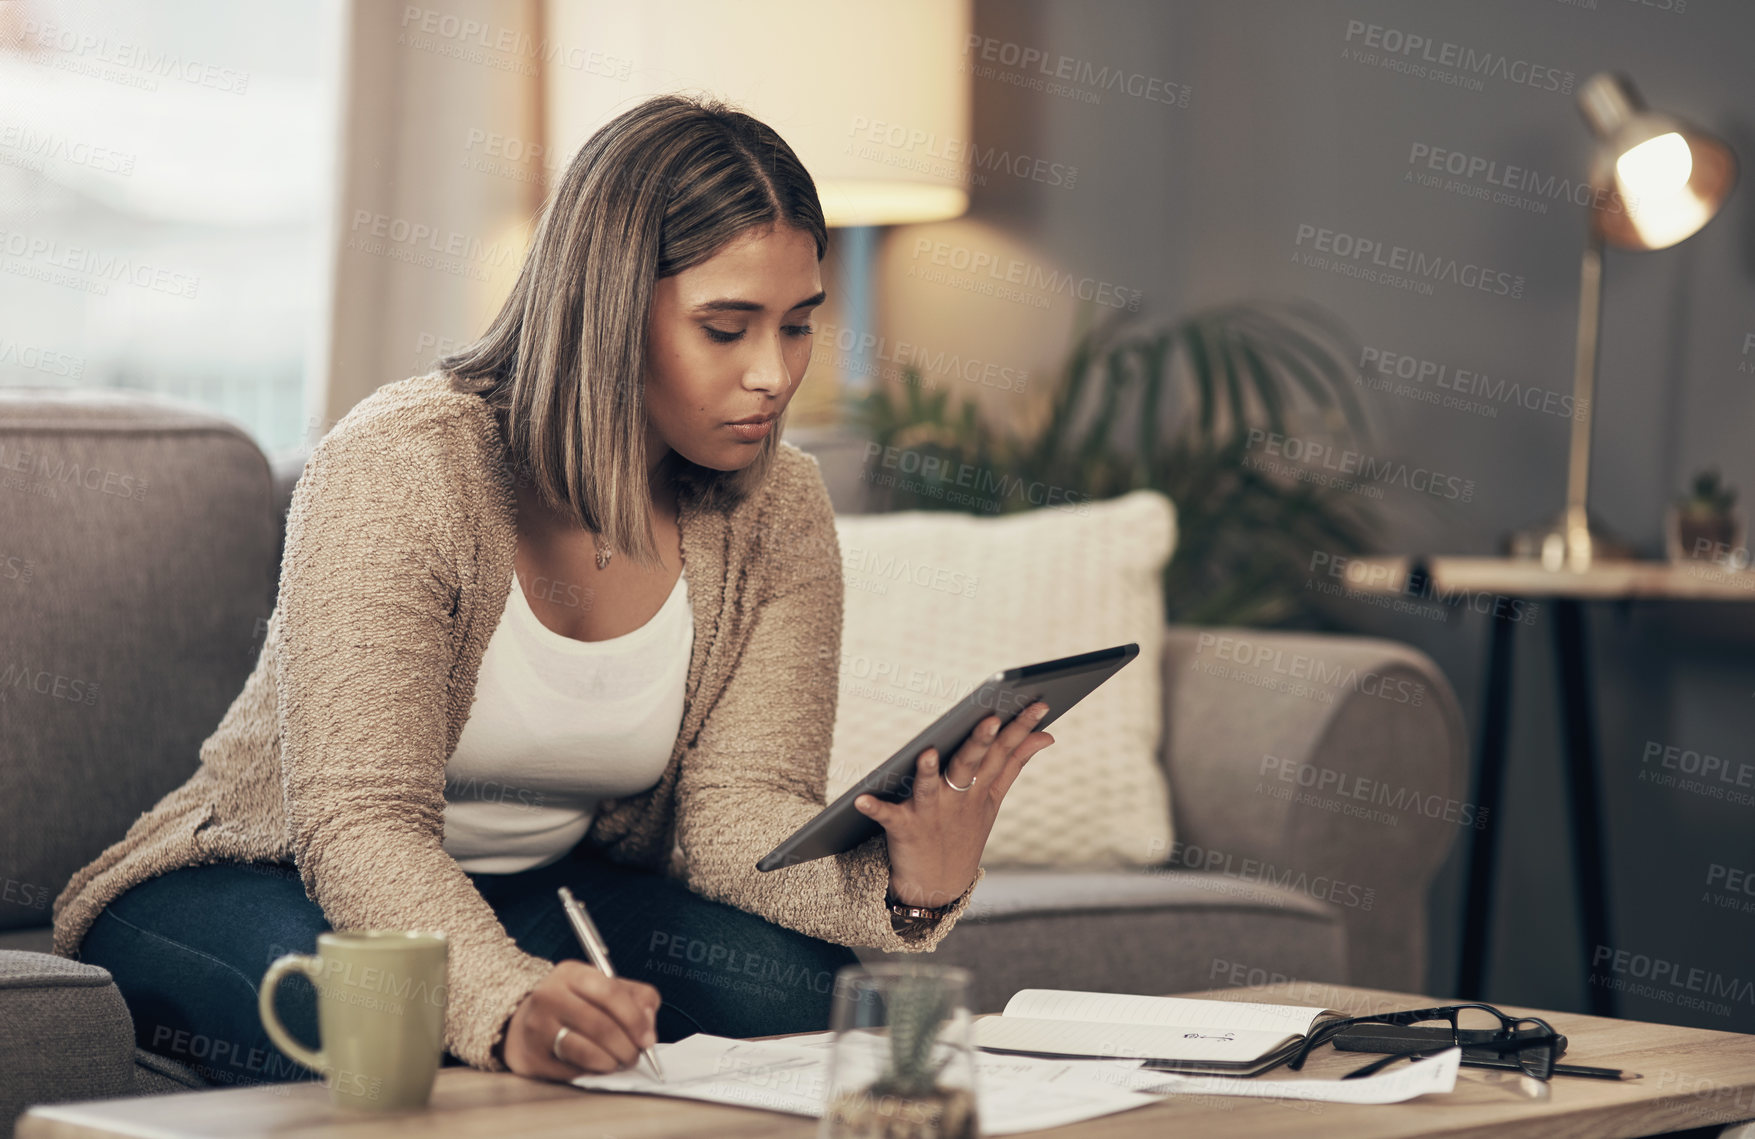 Buy stock photo Shot of a young woman using a digital tablet while going through paperwork at home